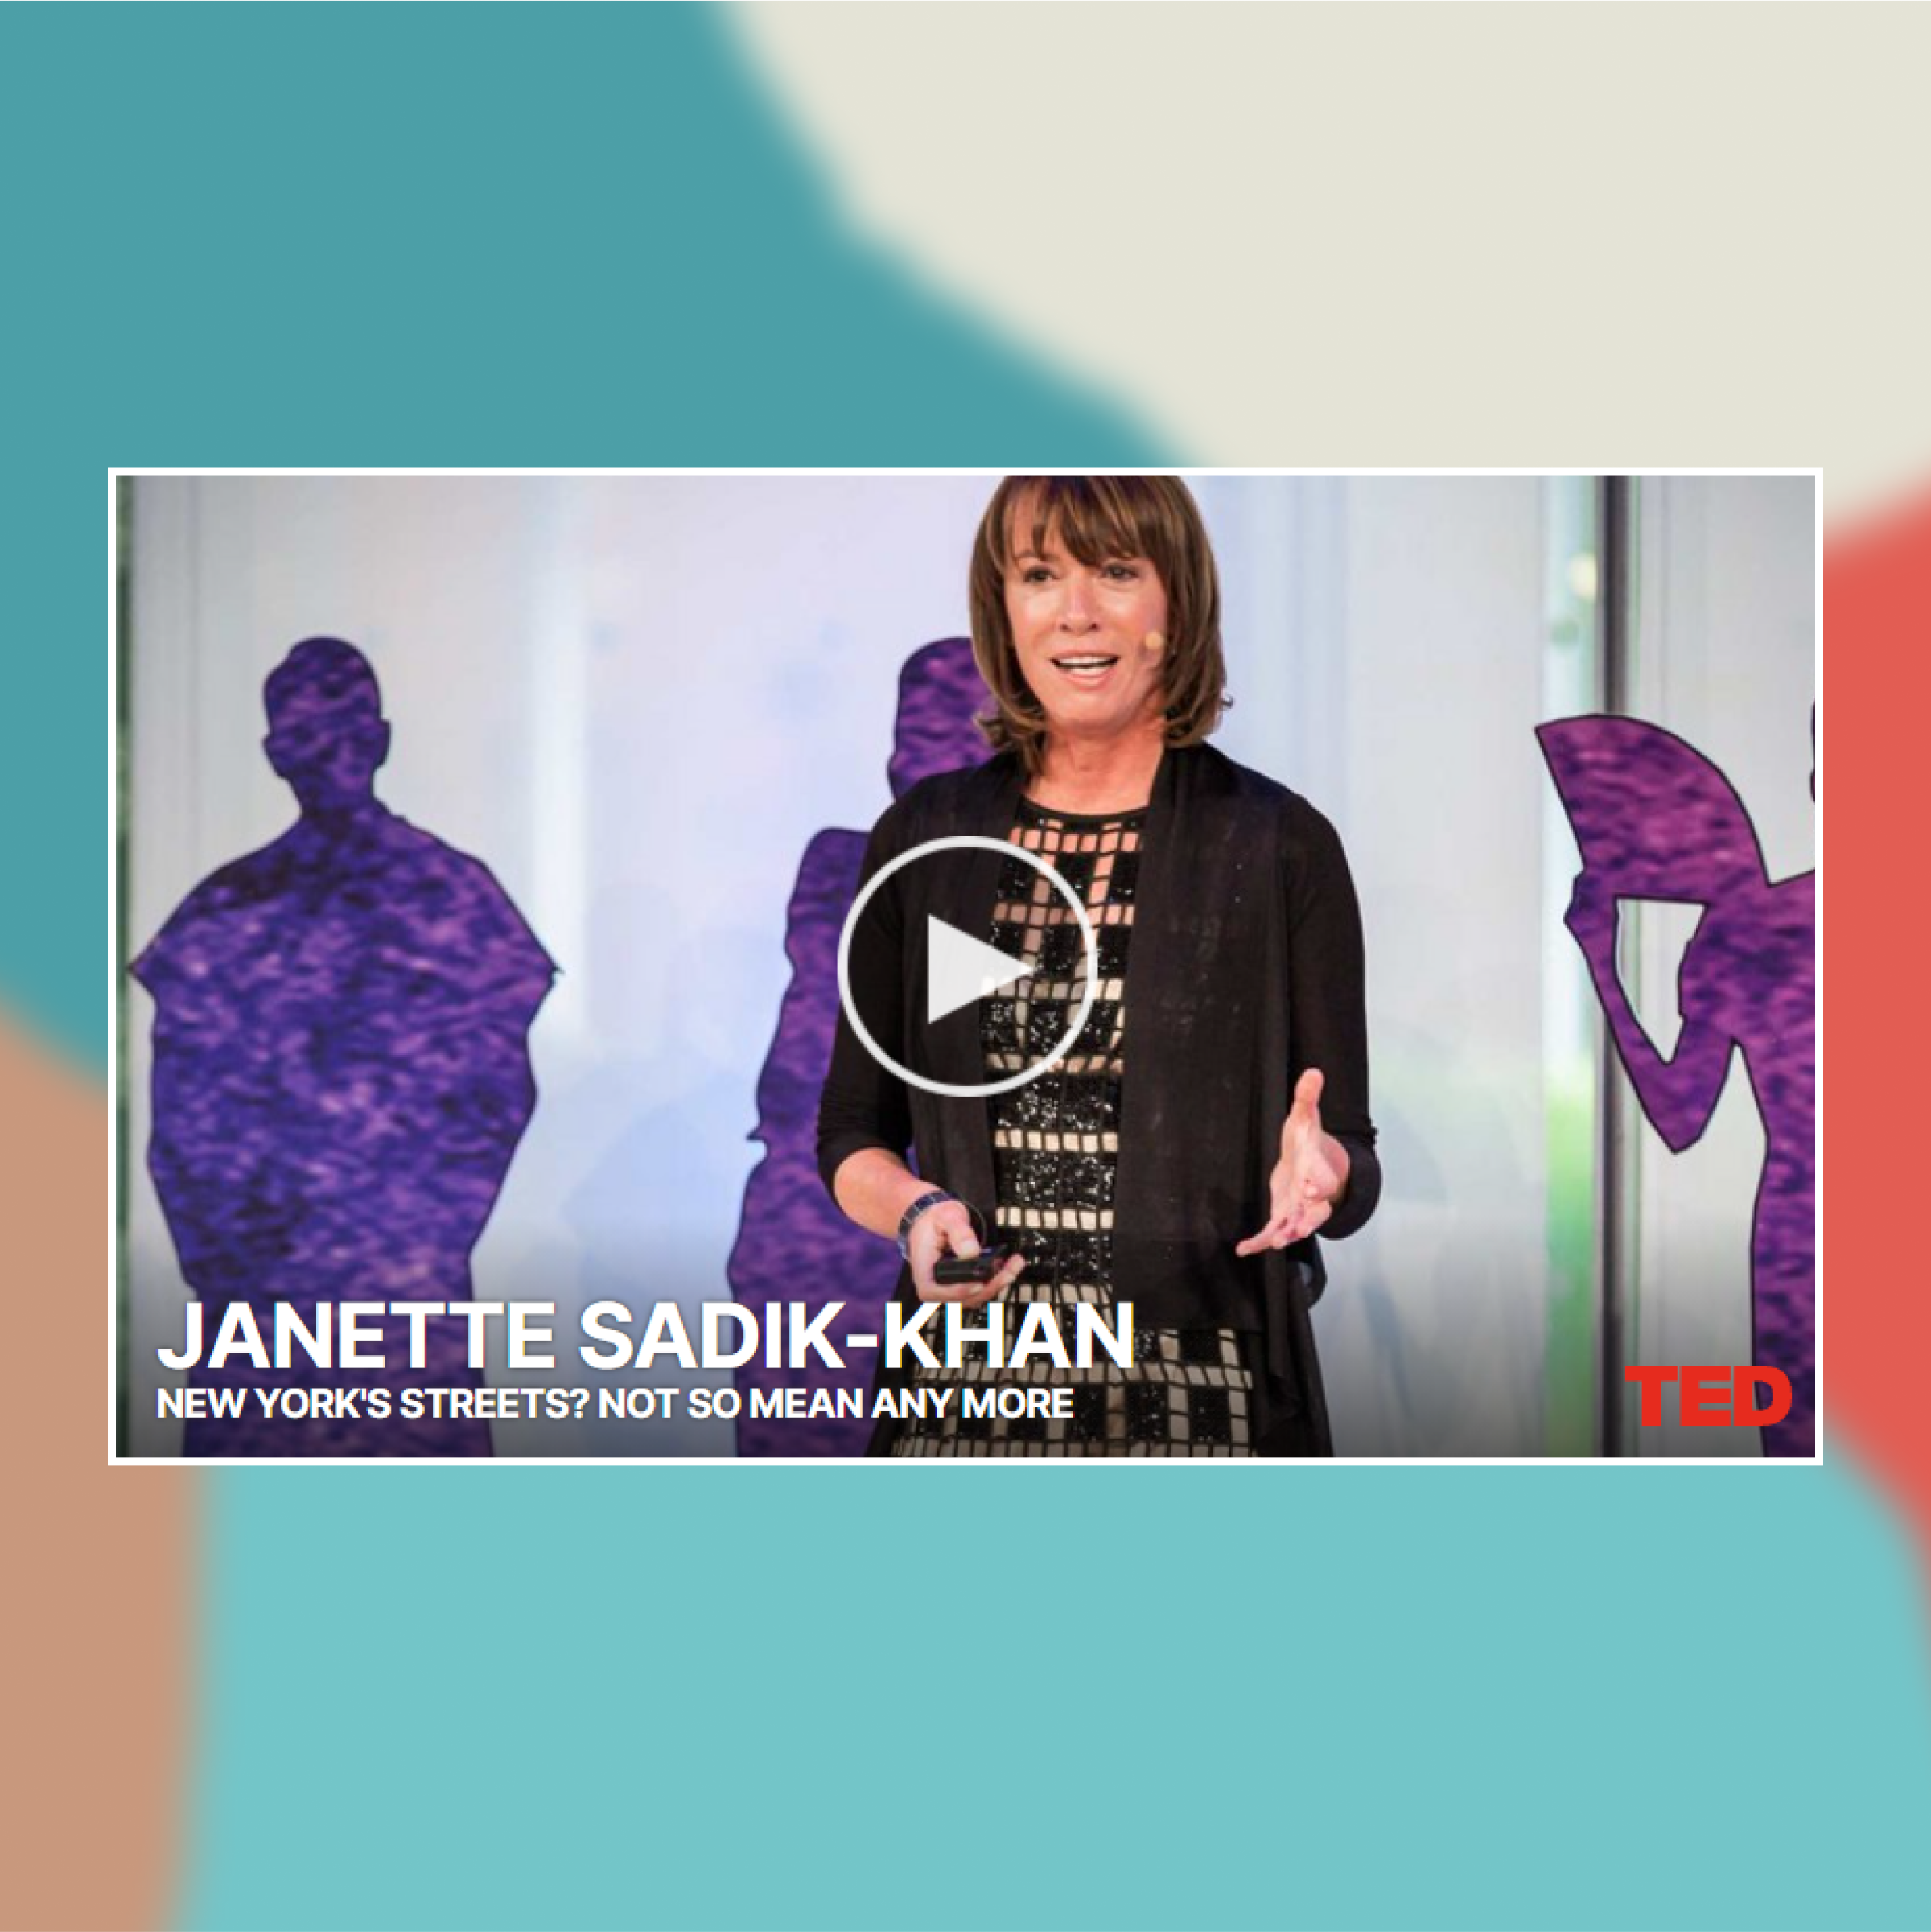 Cover shot of Janette Sadik-Khan's TED talk against an abstract painted background